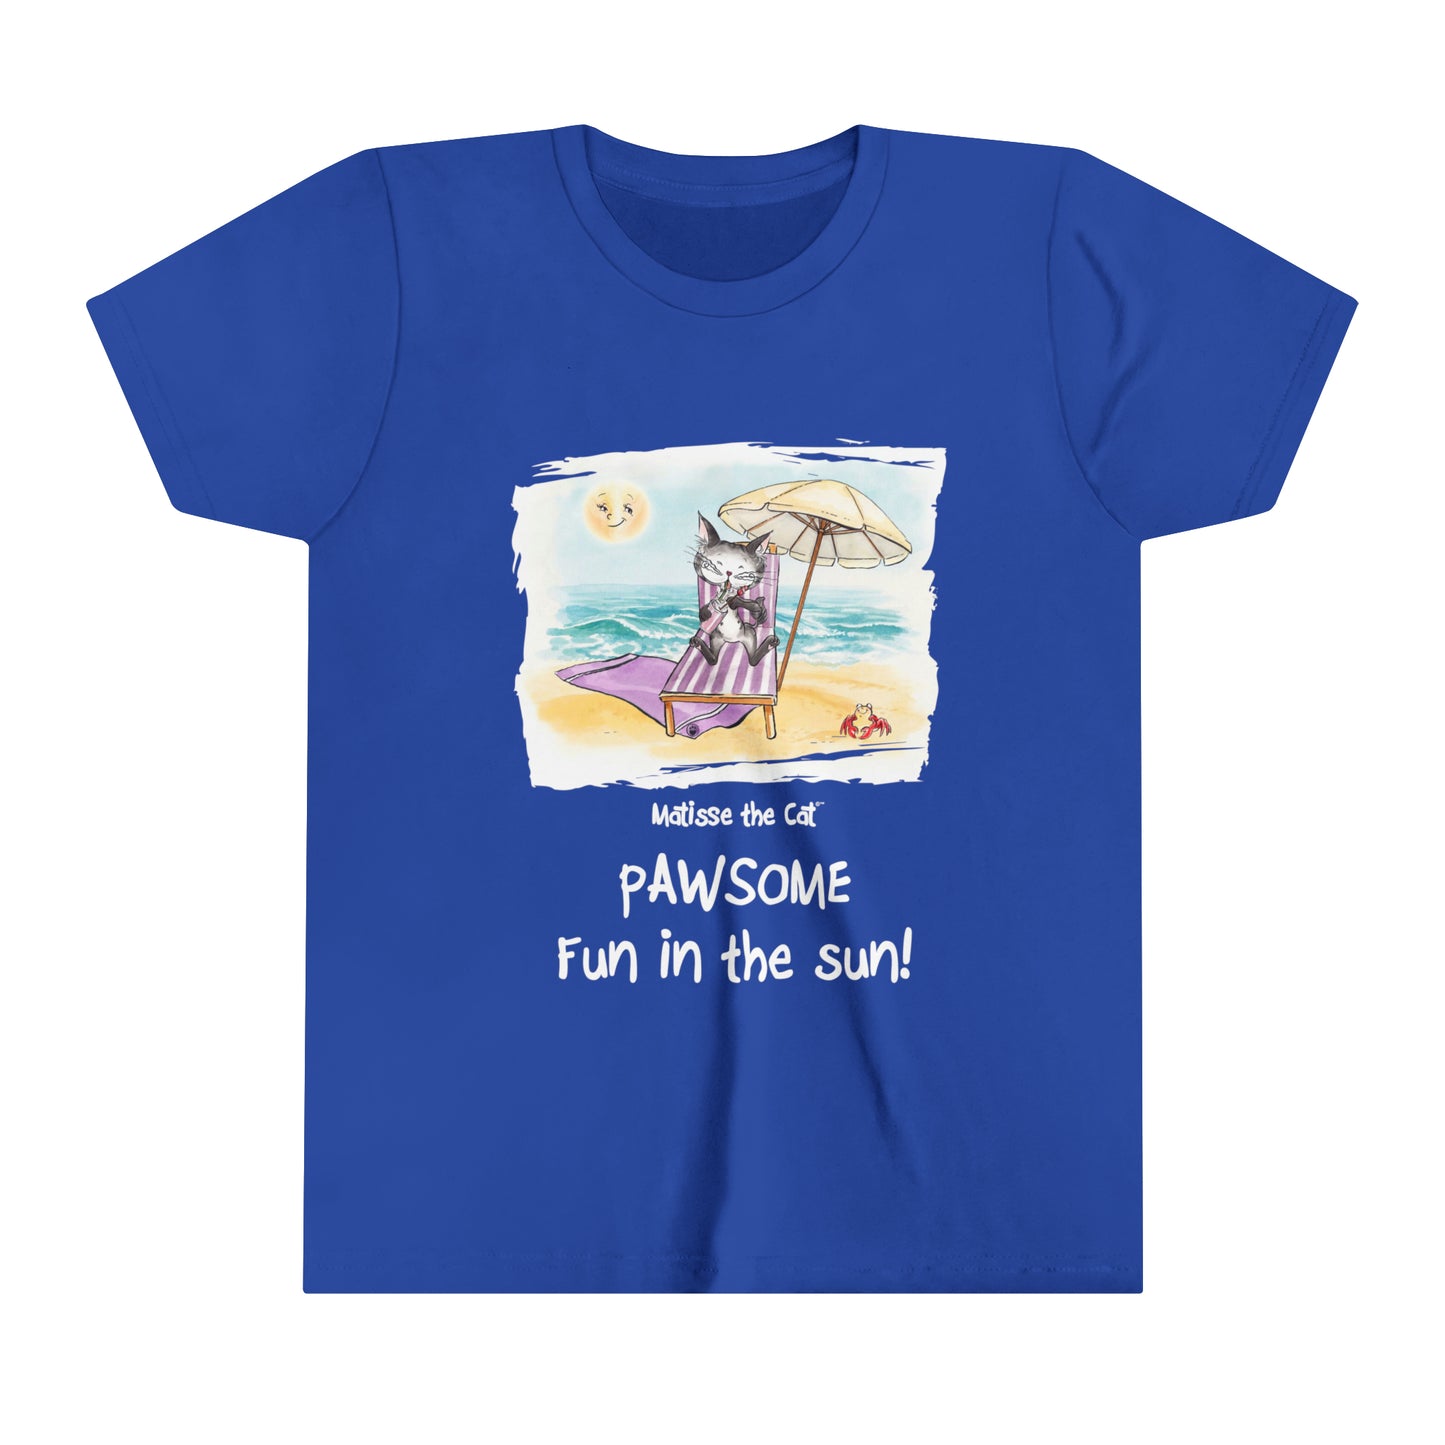 A true blue official, Matisse the Cat children’s t-shirt with the slogan ‘Pawsome Fun in the Sun ‘ showcases Matisse at the beach, relaxing on a sun lounger sipping a mile shake.